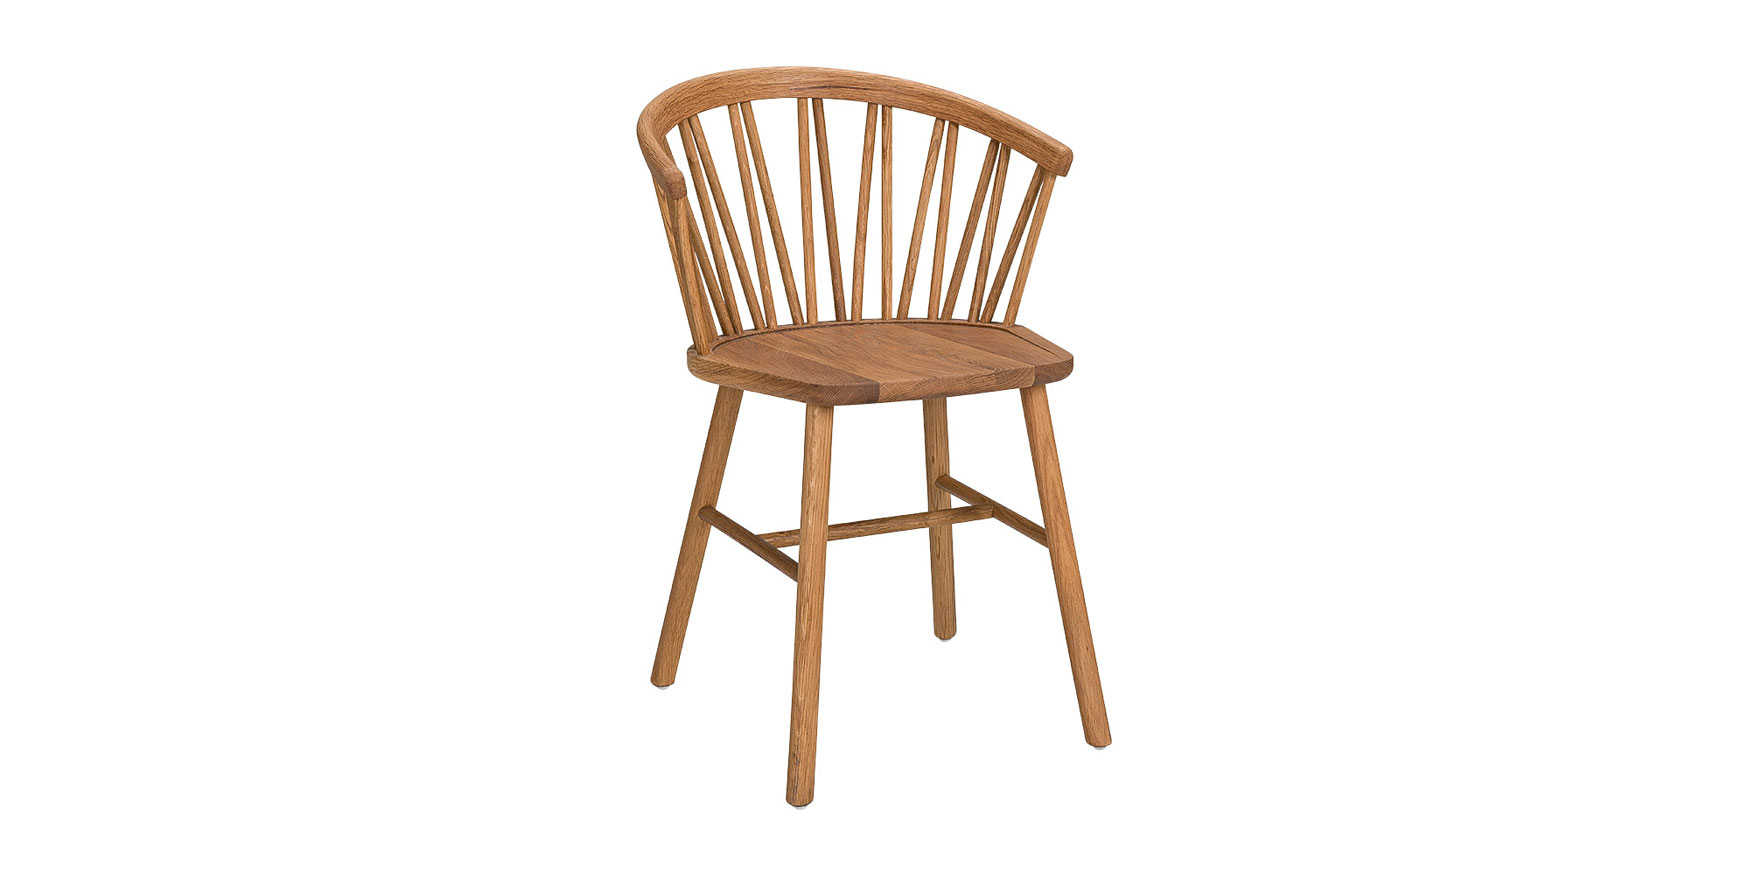 dining chair price
